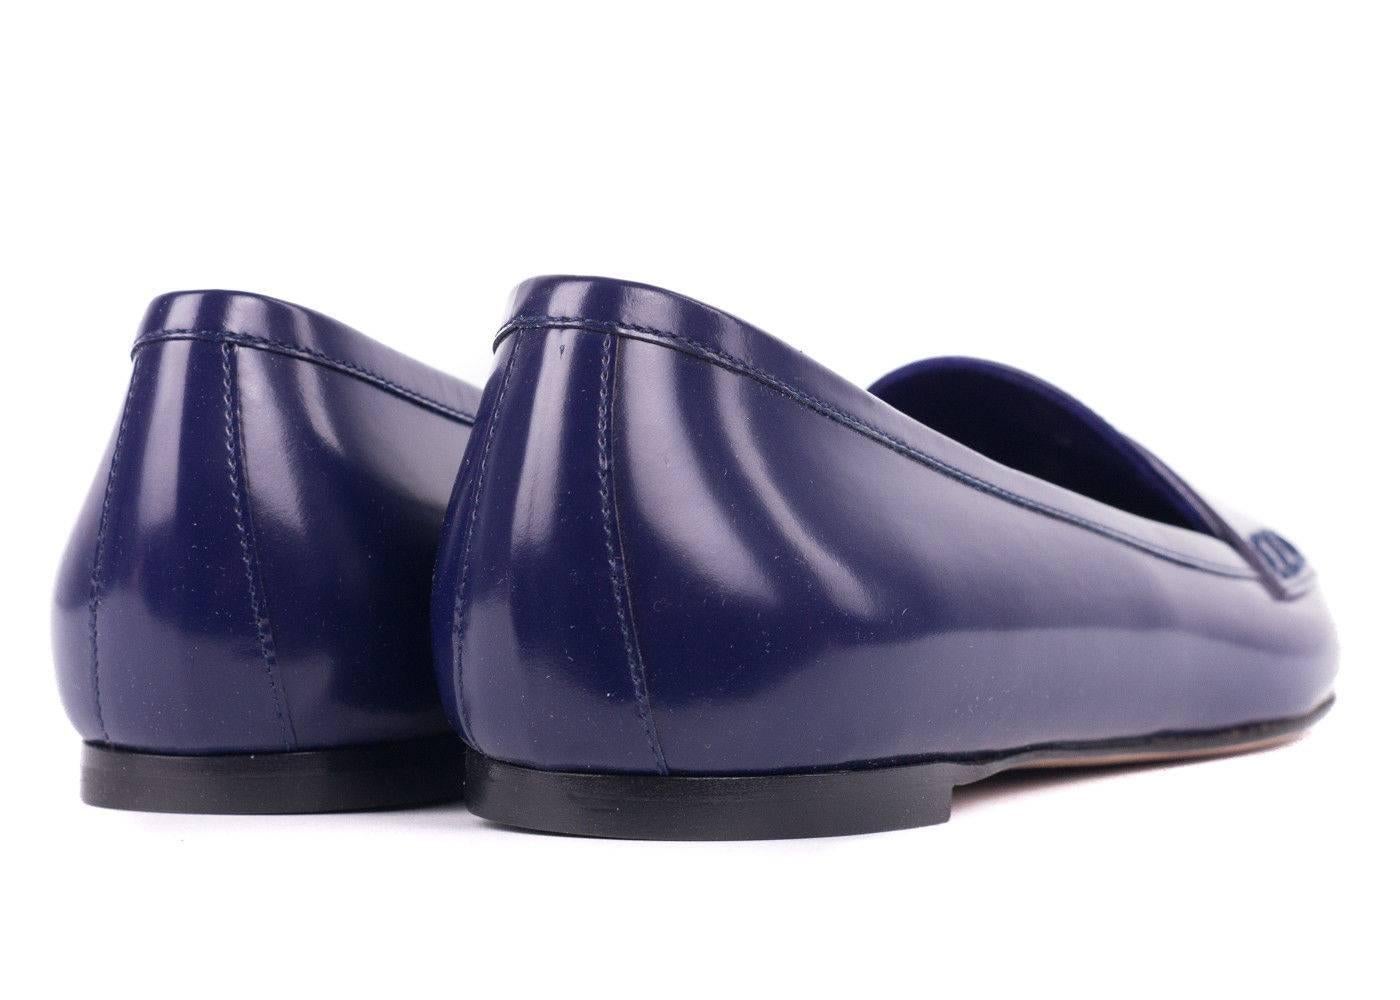 Gianvito Rossi's update to the classic penny loafer is a modern treasure. This purple ballerina flat features the penny bar, pointed to silhouette, and superbly polished leather. You can pair these flats with a slim all black sheath dress for a